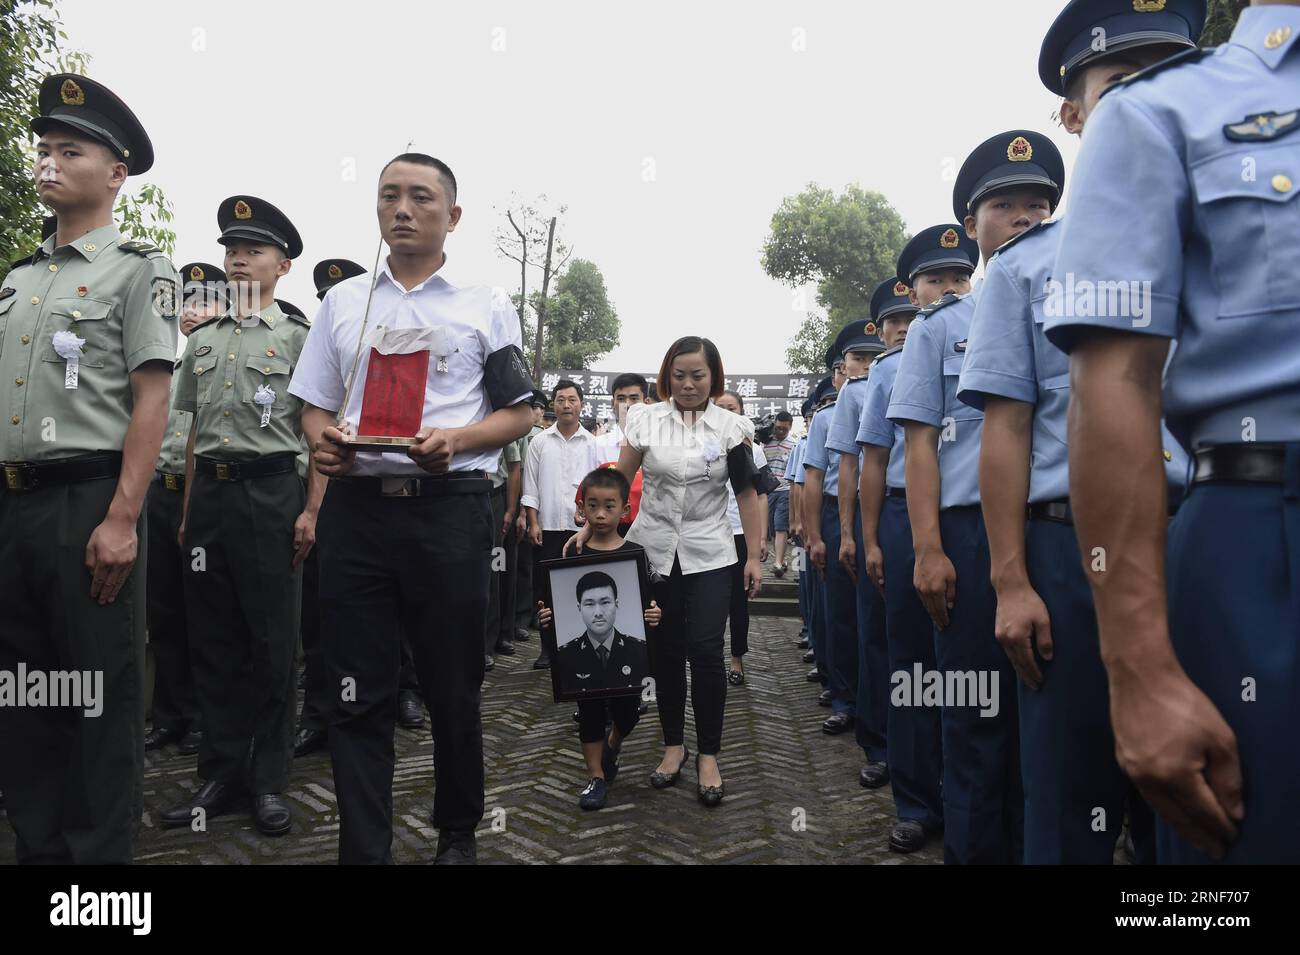 (160722) -- CHENGDU, July 22, 2016 -- Relatives hold portrait and bone ash of deceased Chinese UN peacekeeper Li Lei as they attend the burial ceremony in Chengdu, capital of southwest China s Sichuan Province, July 22, 2016. Chinese UN peacekeepers Li Lei and Yang Shupeng were killed on the evening of July 10 after a mortar shell hit their armored vehicle during fighting between two army factions in Juba, capital of South Sudan. ) (lfj) CHINA-SICHUAN-CHINESE UN PEACEKEEPER-BURIAL (CN) LiuxKun PUBLICATIONxNOTxINxCHN   160722 Chengdu July 22 2016 Relatives Hold Portrait and Bone Ash of deceased Stock Photo